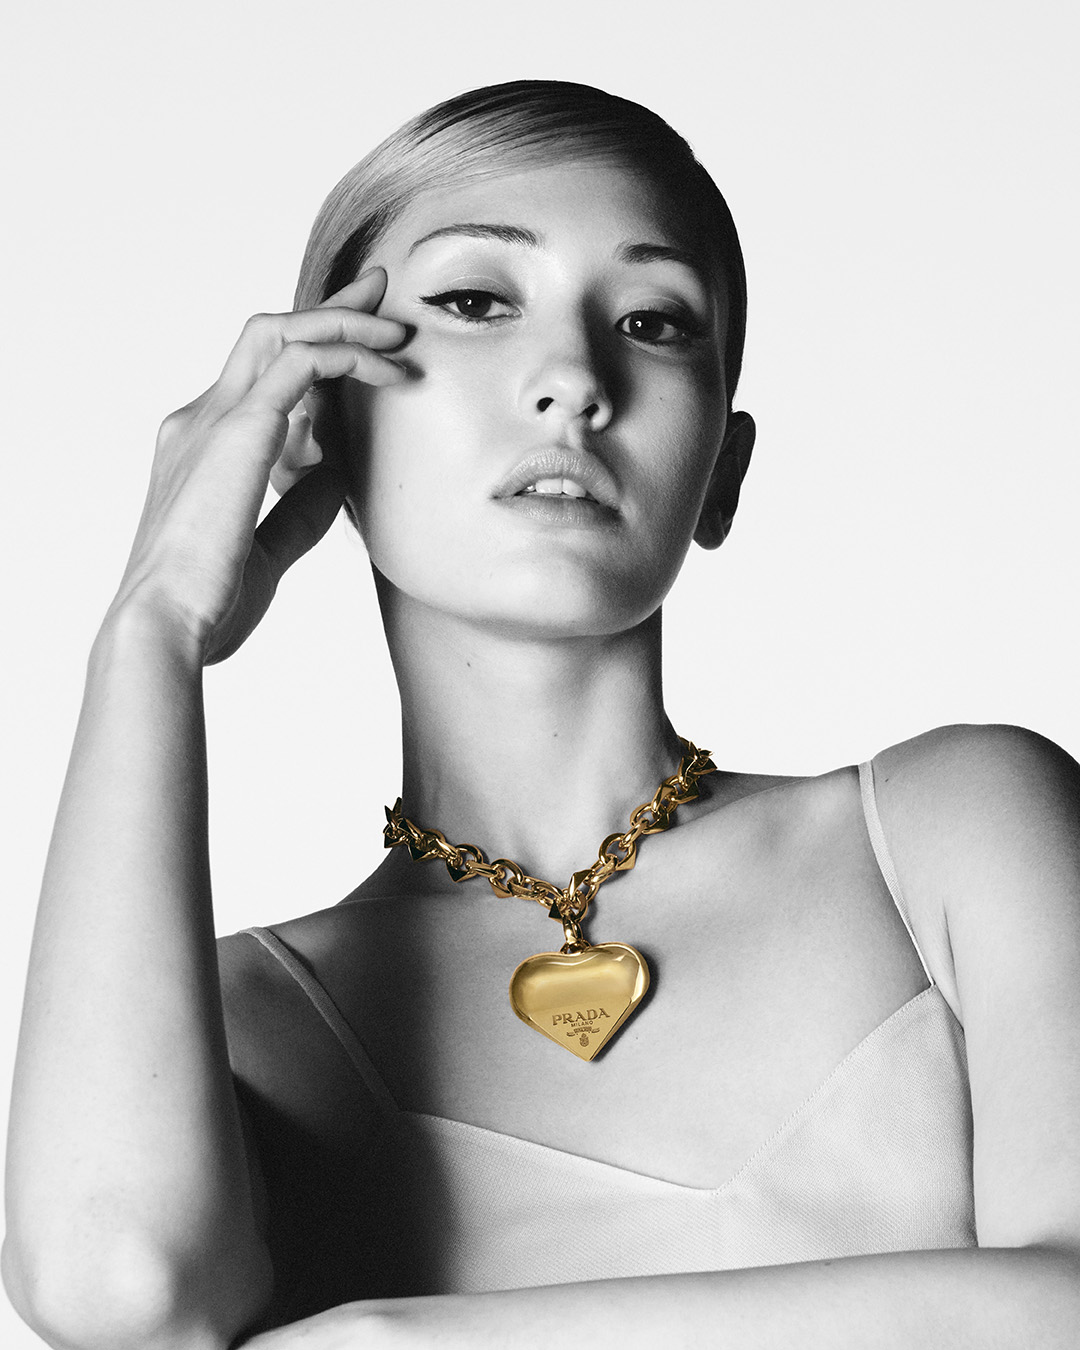 The ETERNAL GOLD Collection by Prada Fine Jewelry is Fascinating